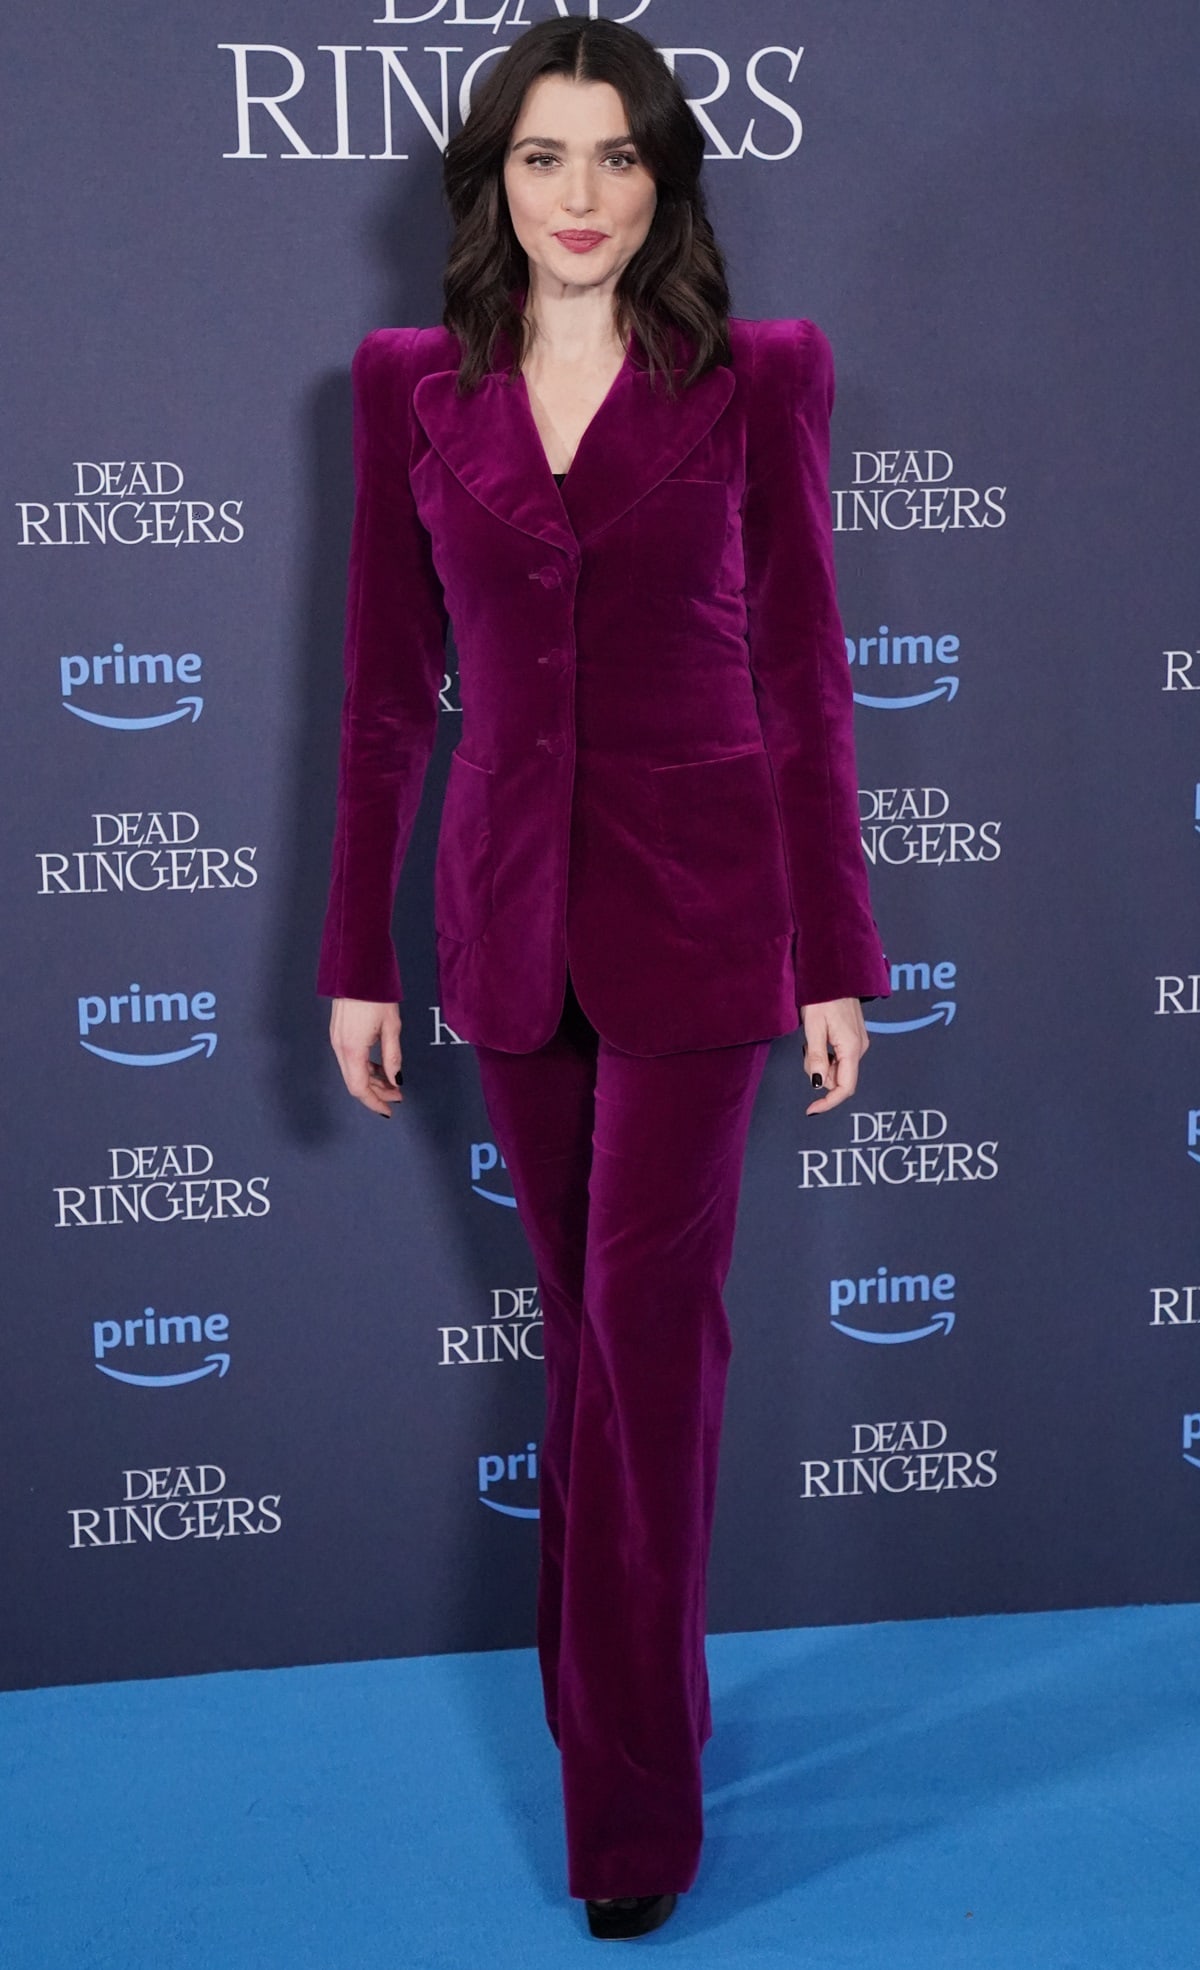 Rachel Weisz opting for a resplendent plum-colored suit crafted by The Vampire’s Wife for the screening of "Dead Ringers"